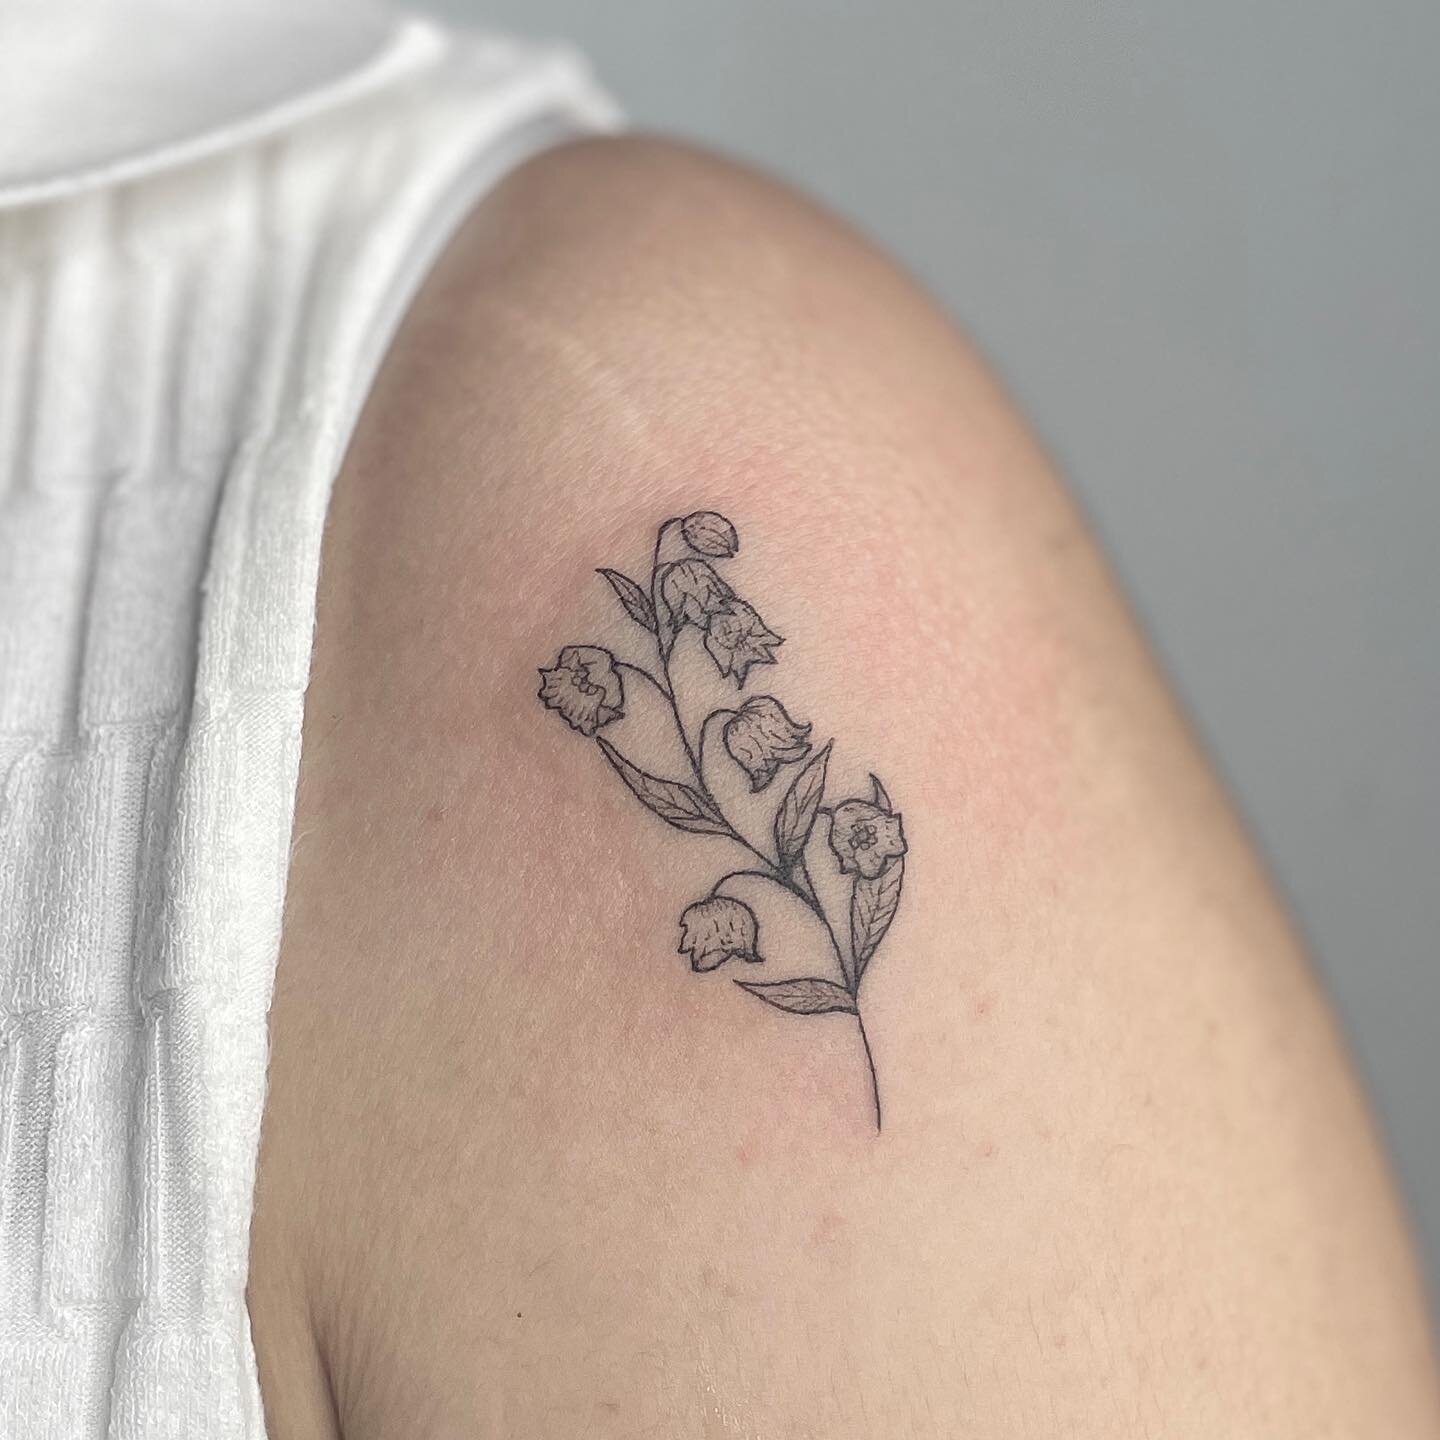 A pretty one from my flash for Sarah&rsquo;s first tattoo! Thank you so much for coming in and trusting me 🌼🤍
.
.
.

#tattoo #tattoos #tattooing #newyork #nyc #finelinetattoo #fineline #blackworktattoo #linework #tattooed #spring #summer #newyorkta